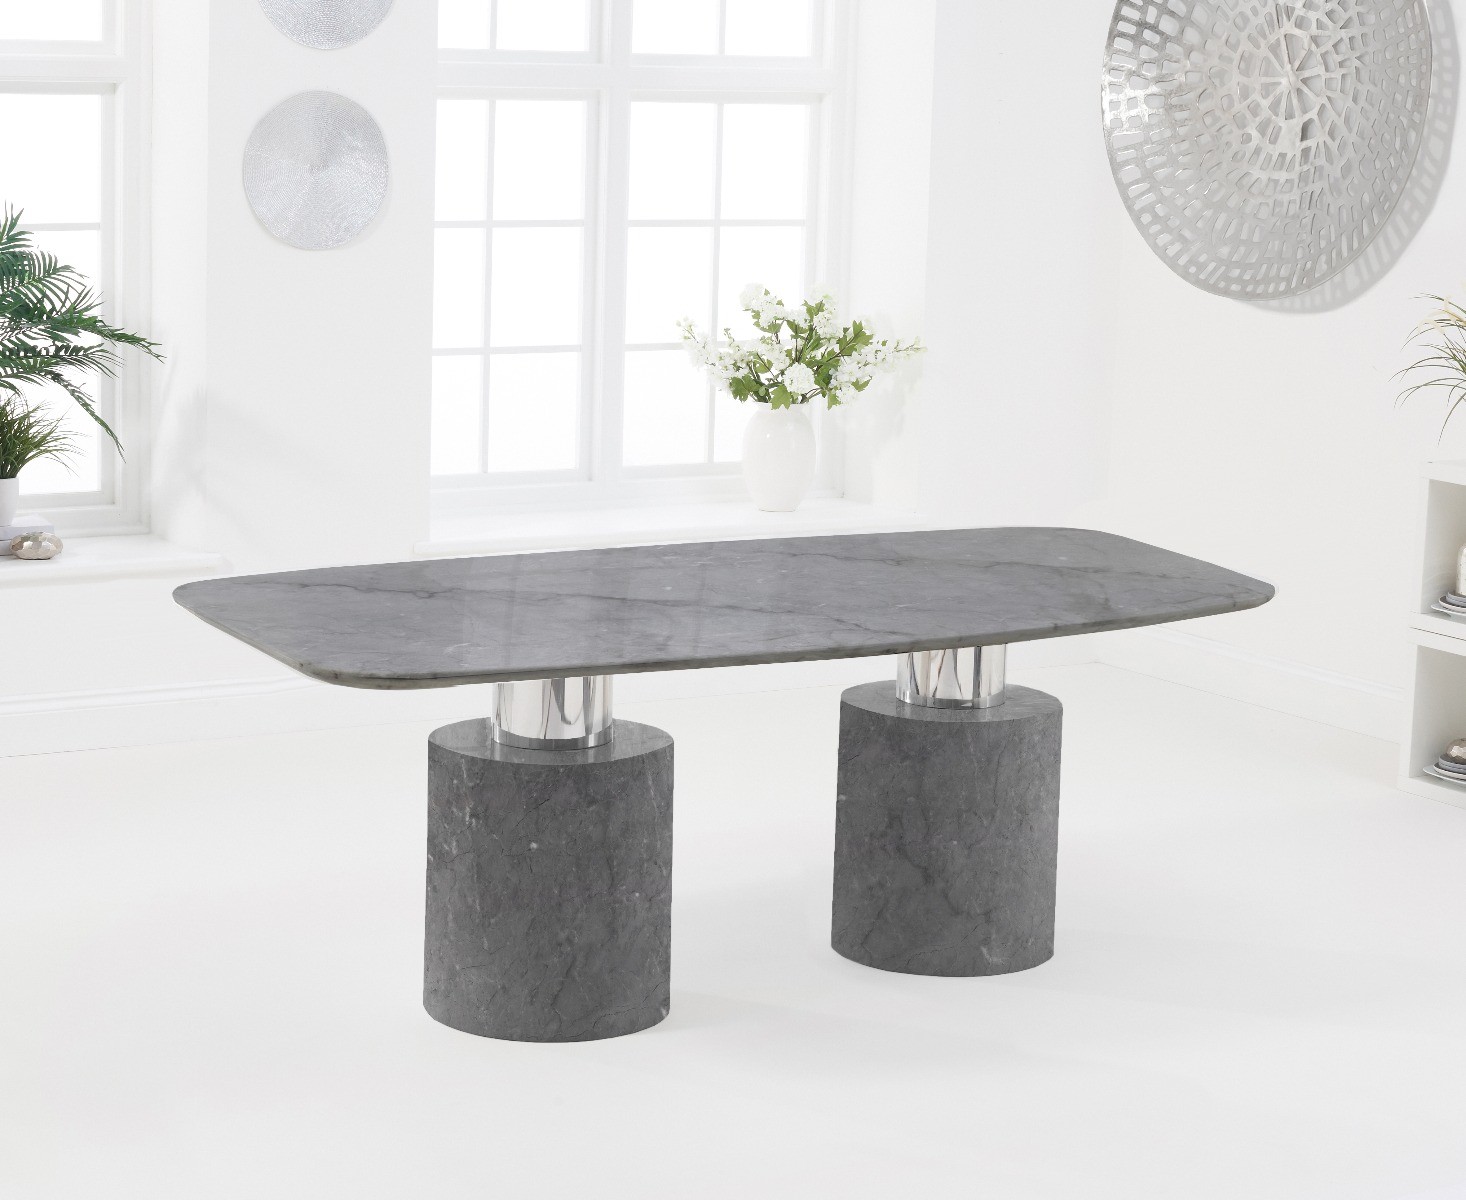 Photo 4 of Antonio 180cm grey marble dining table with 6 grey sophia chairs